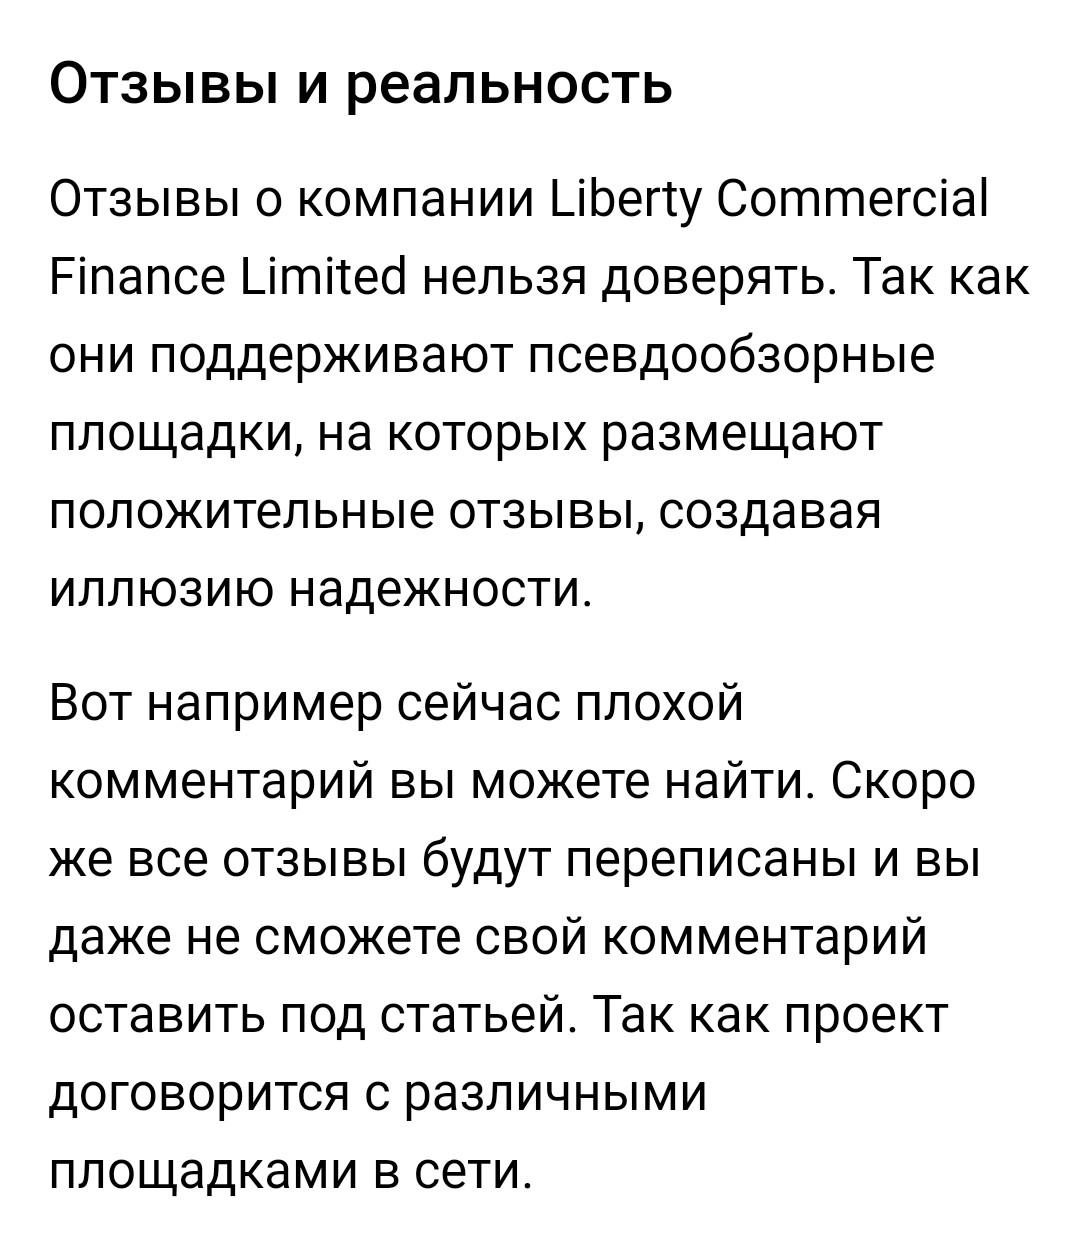 Liberty commercial finance limited отзывы